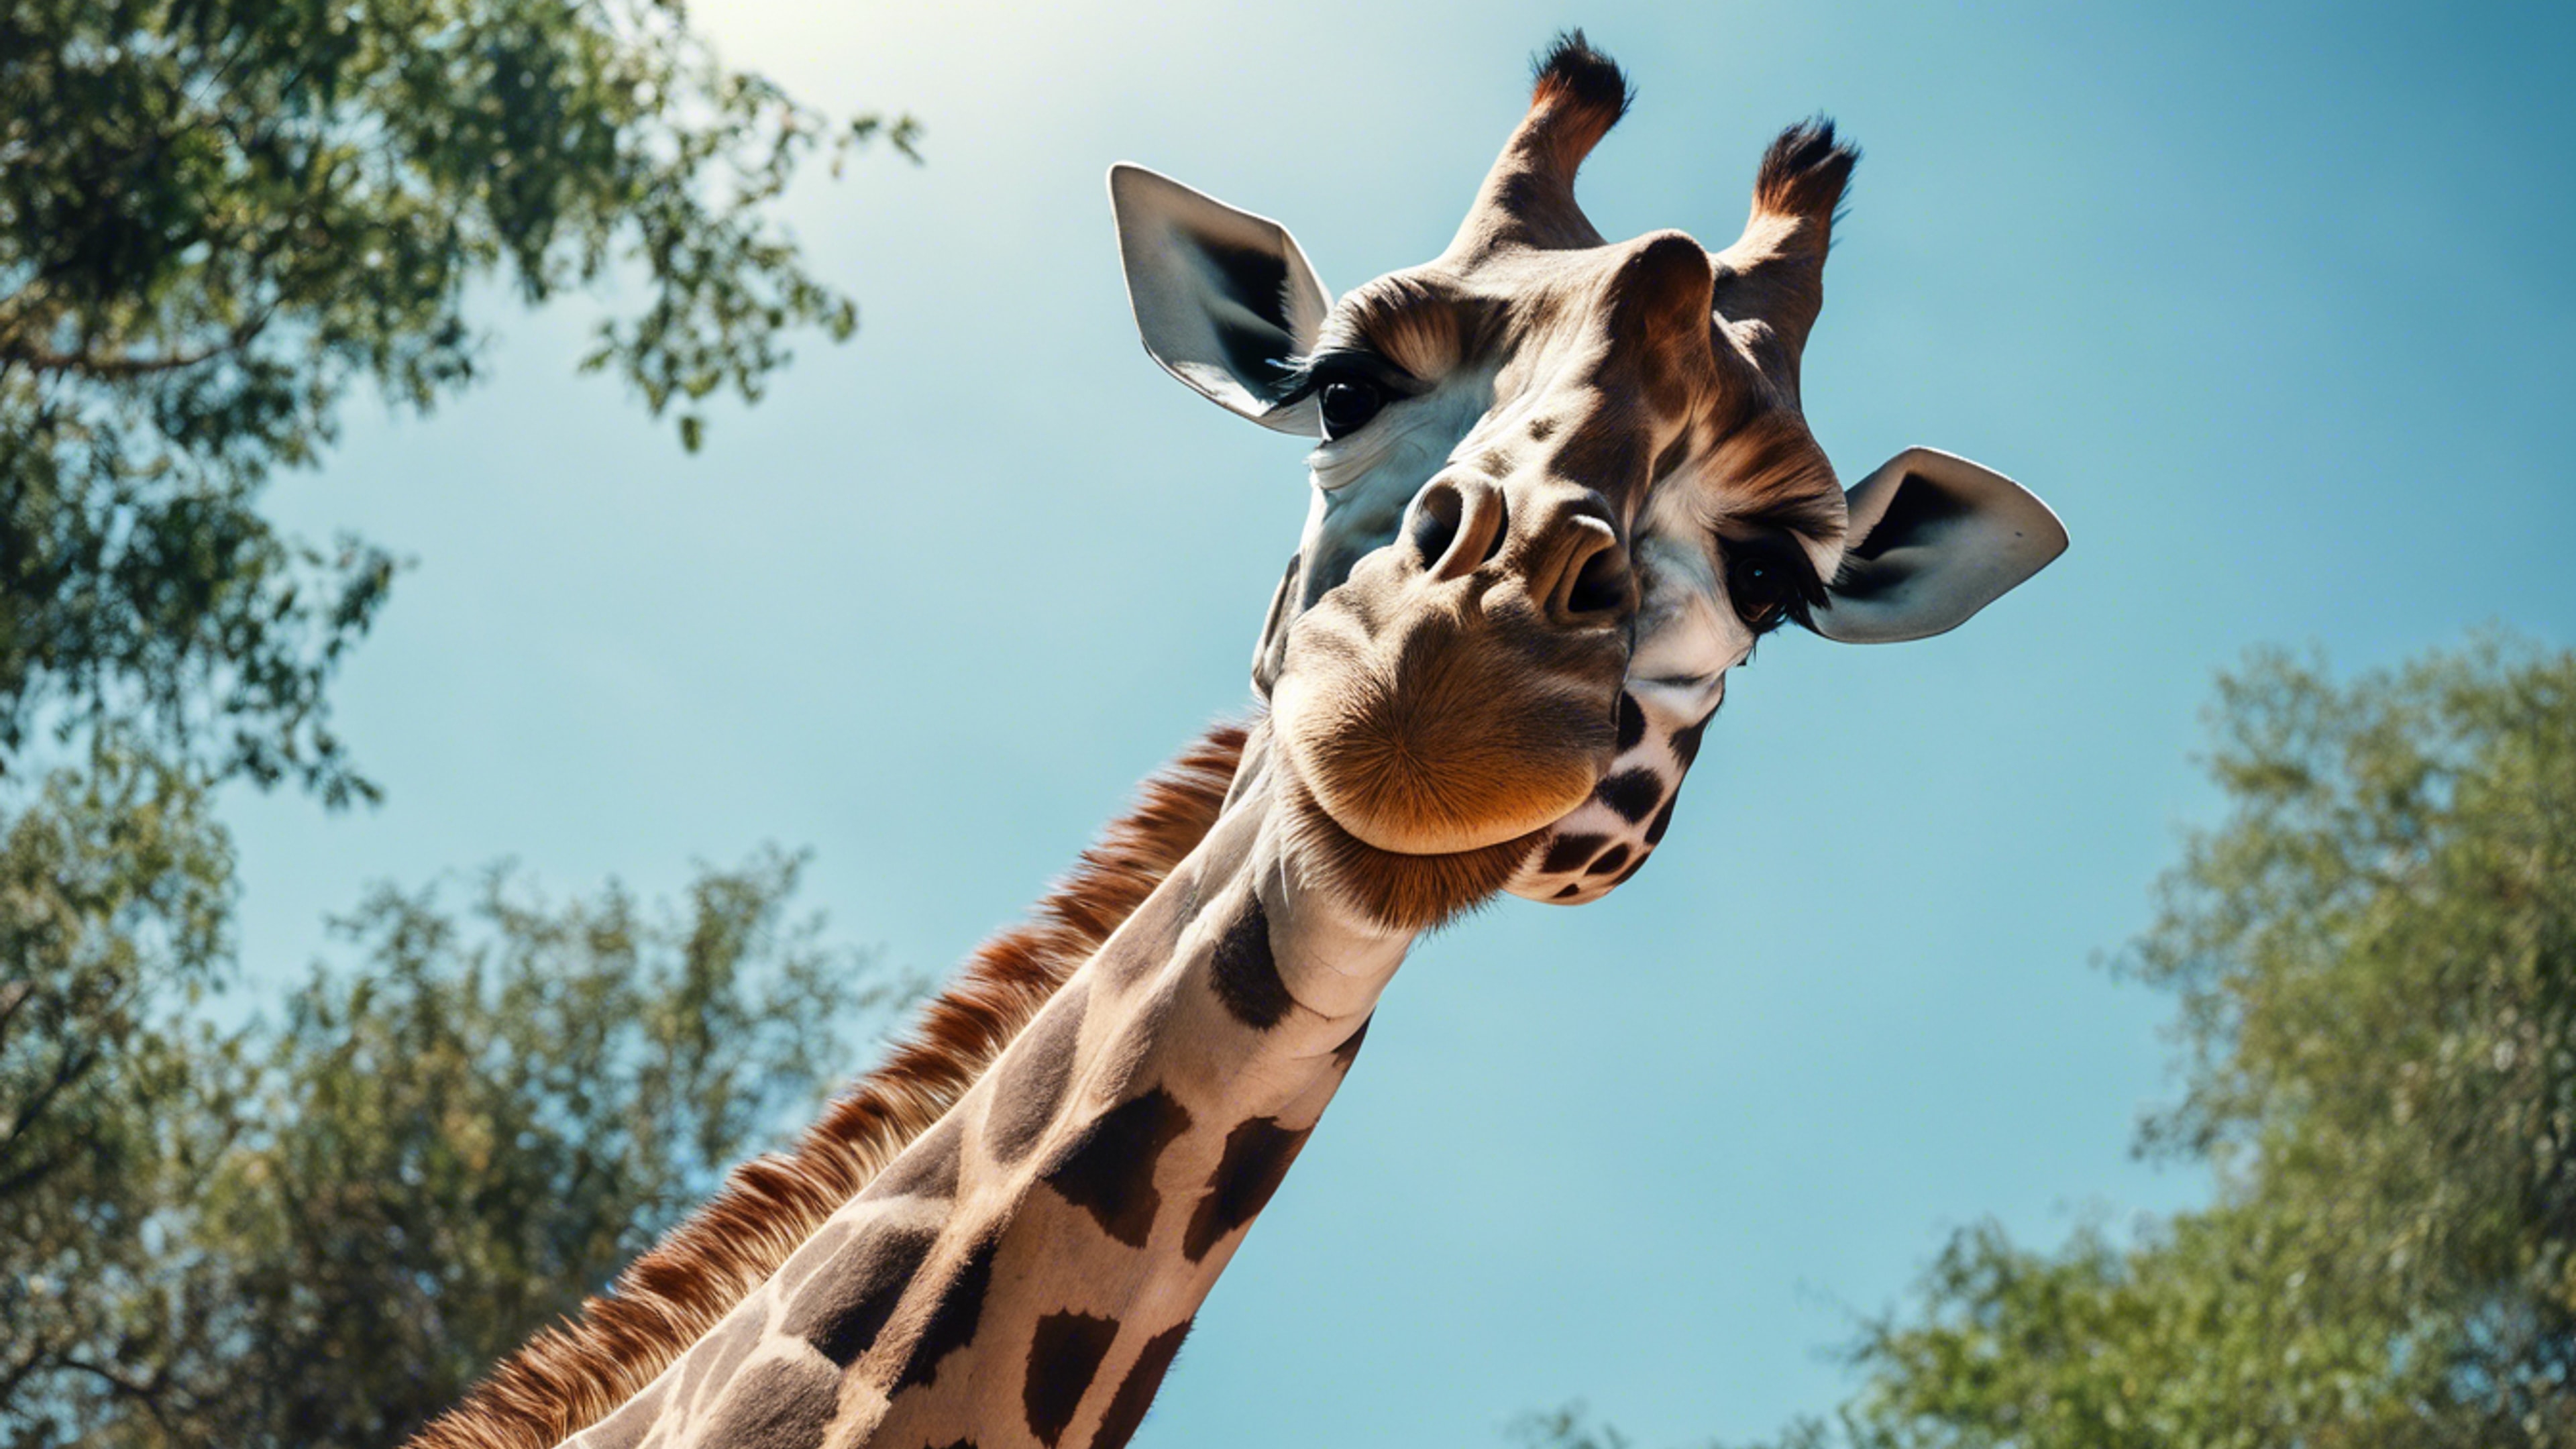 A picture from a below angle showing the towering magnificence of a giraffe against a clear blue sky. Wallpaper[8a88956d9aa2483bb204]